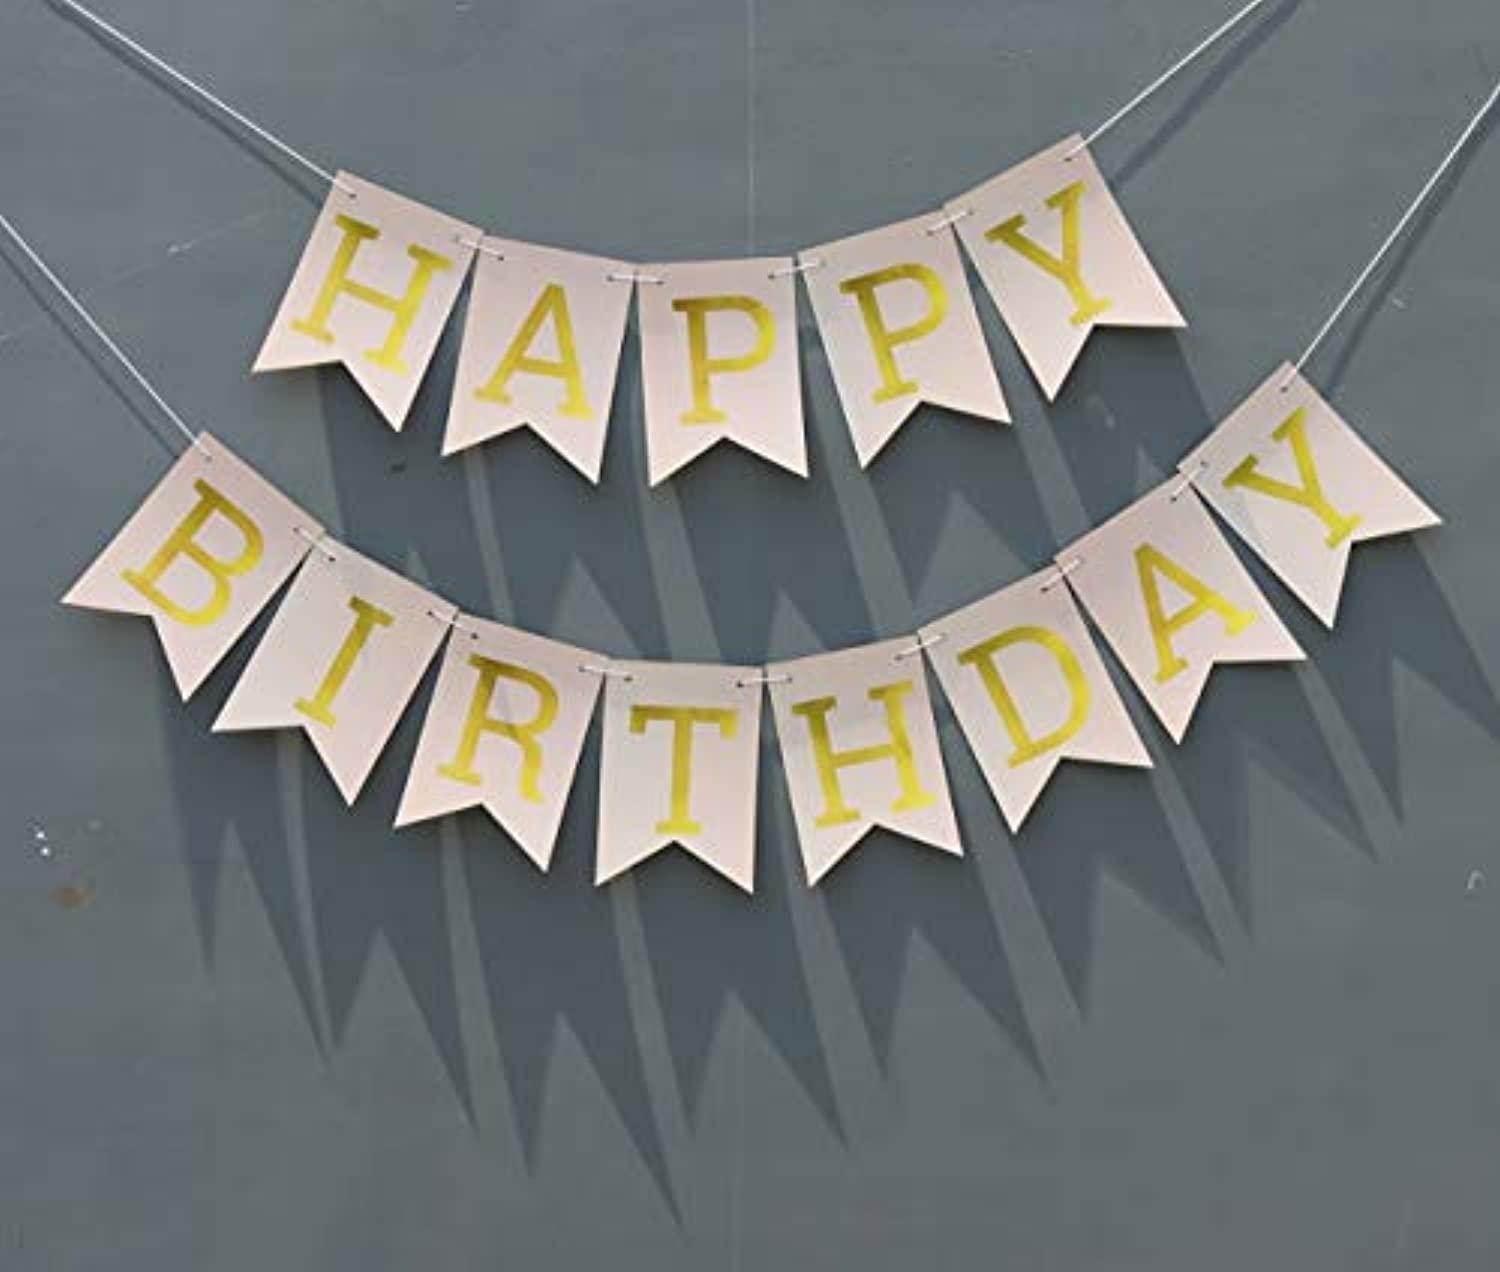 Ideas from Boston-Happy birthday Banner, Party decorations, Wall Banner Cutouts, Happy Birthday yellow Sign Banner for, Colorful HBD decoration – BOSTON CREATIVE COMPANY